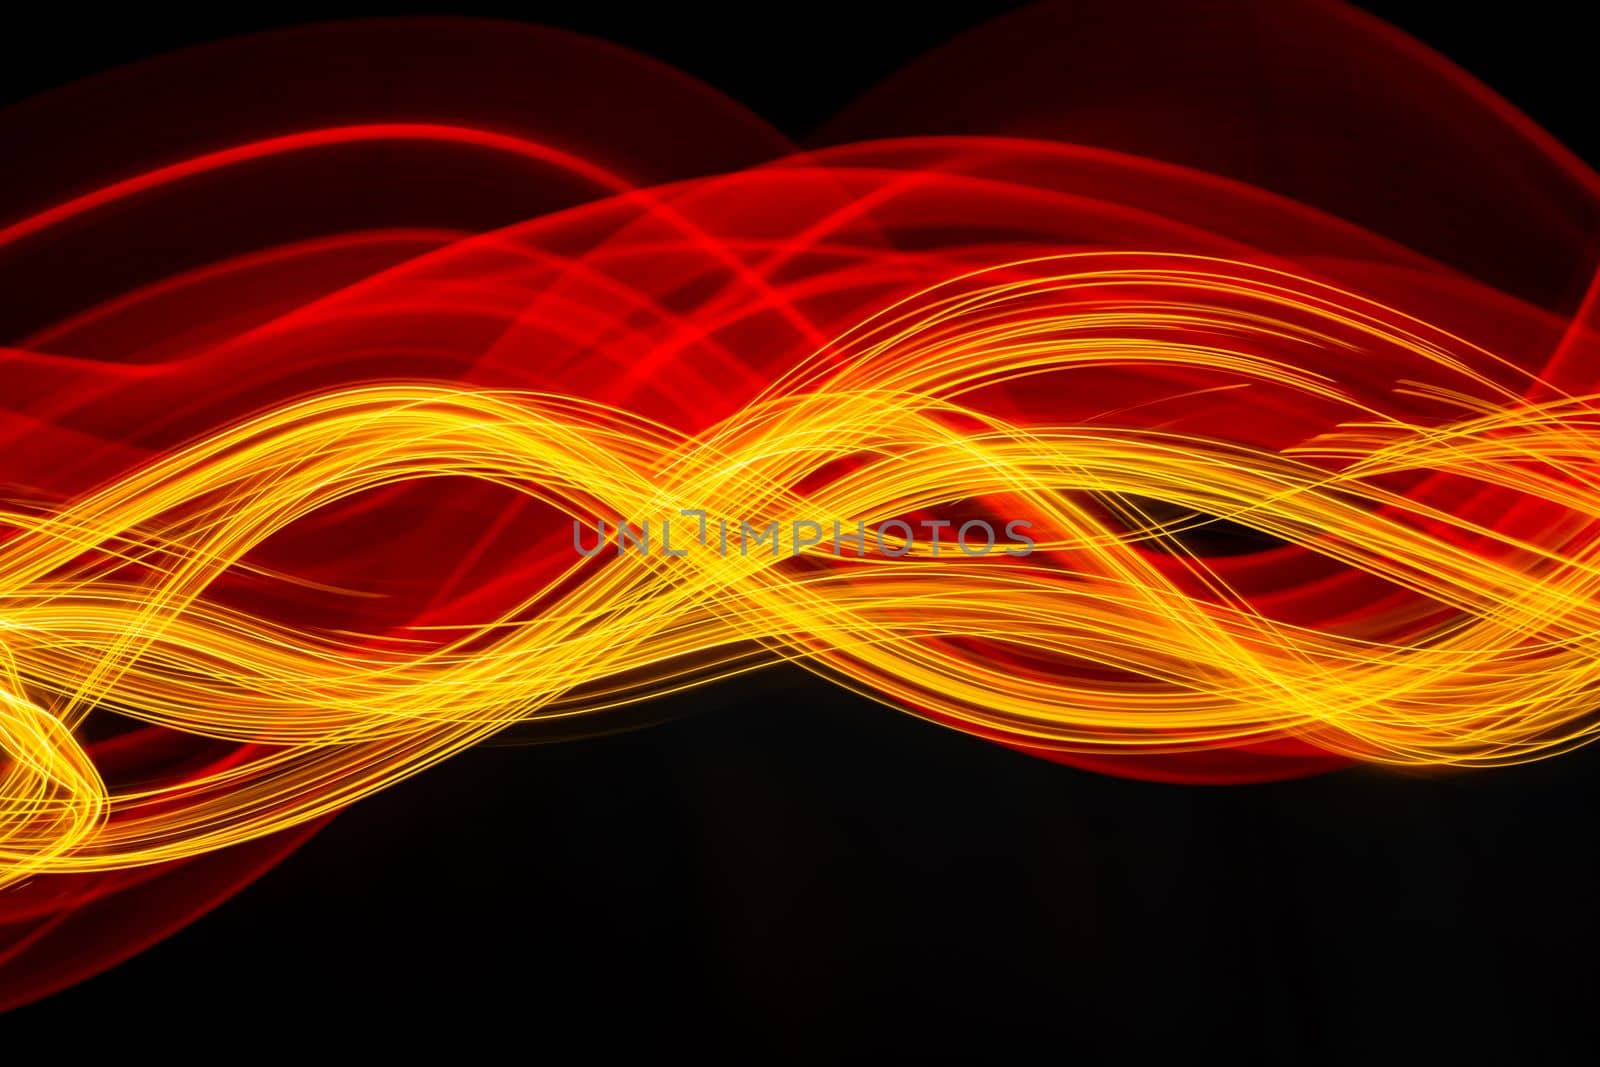 Abstract modern technology banner design. Digital neon fractal lines on black background. by PaulCarr